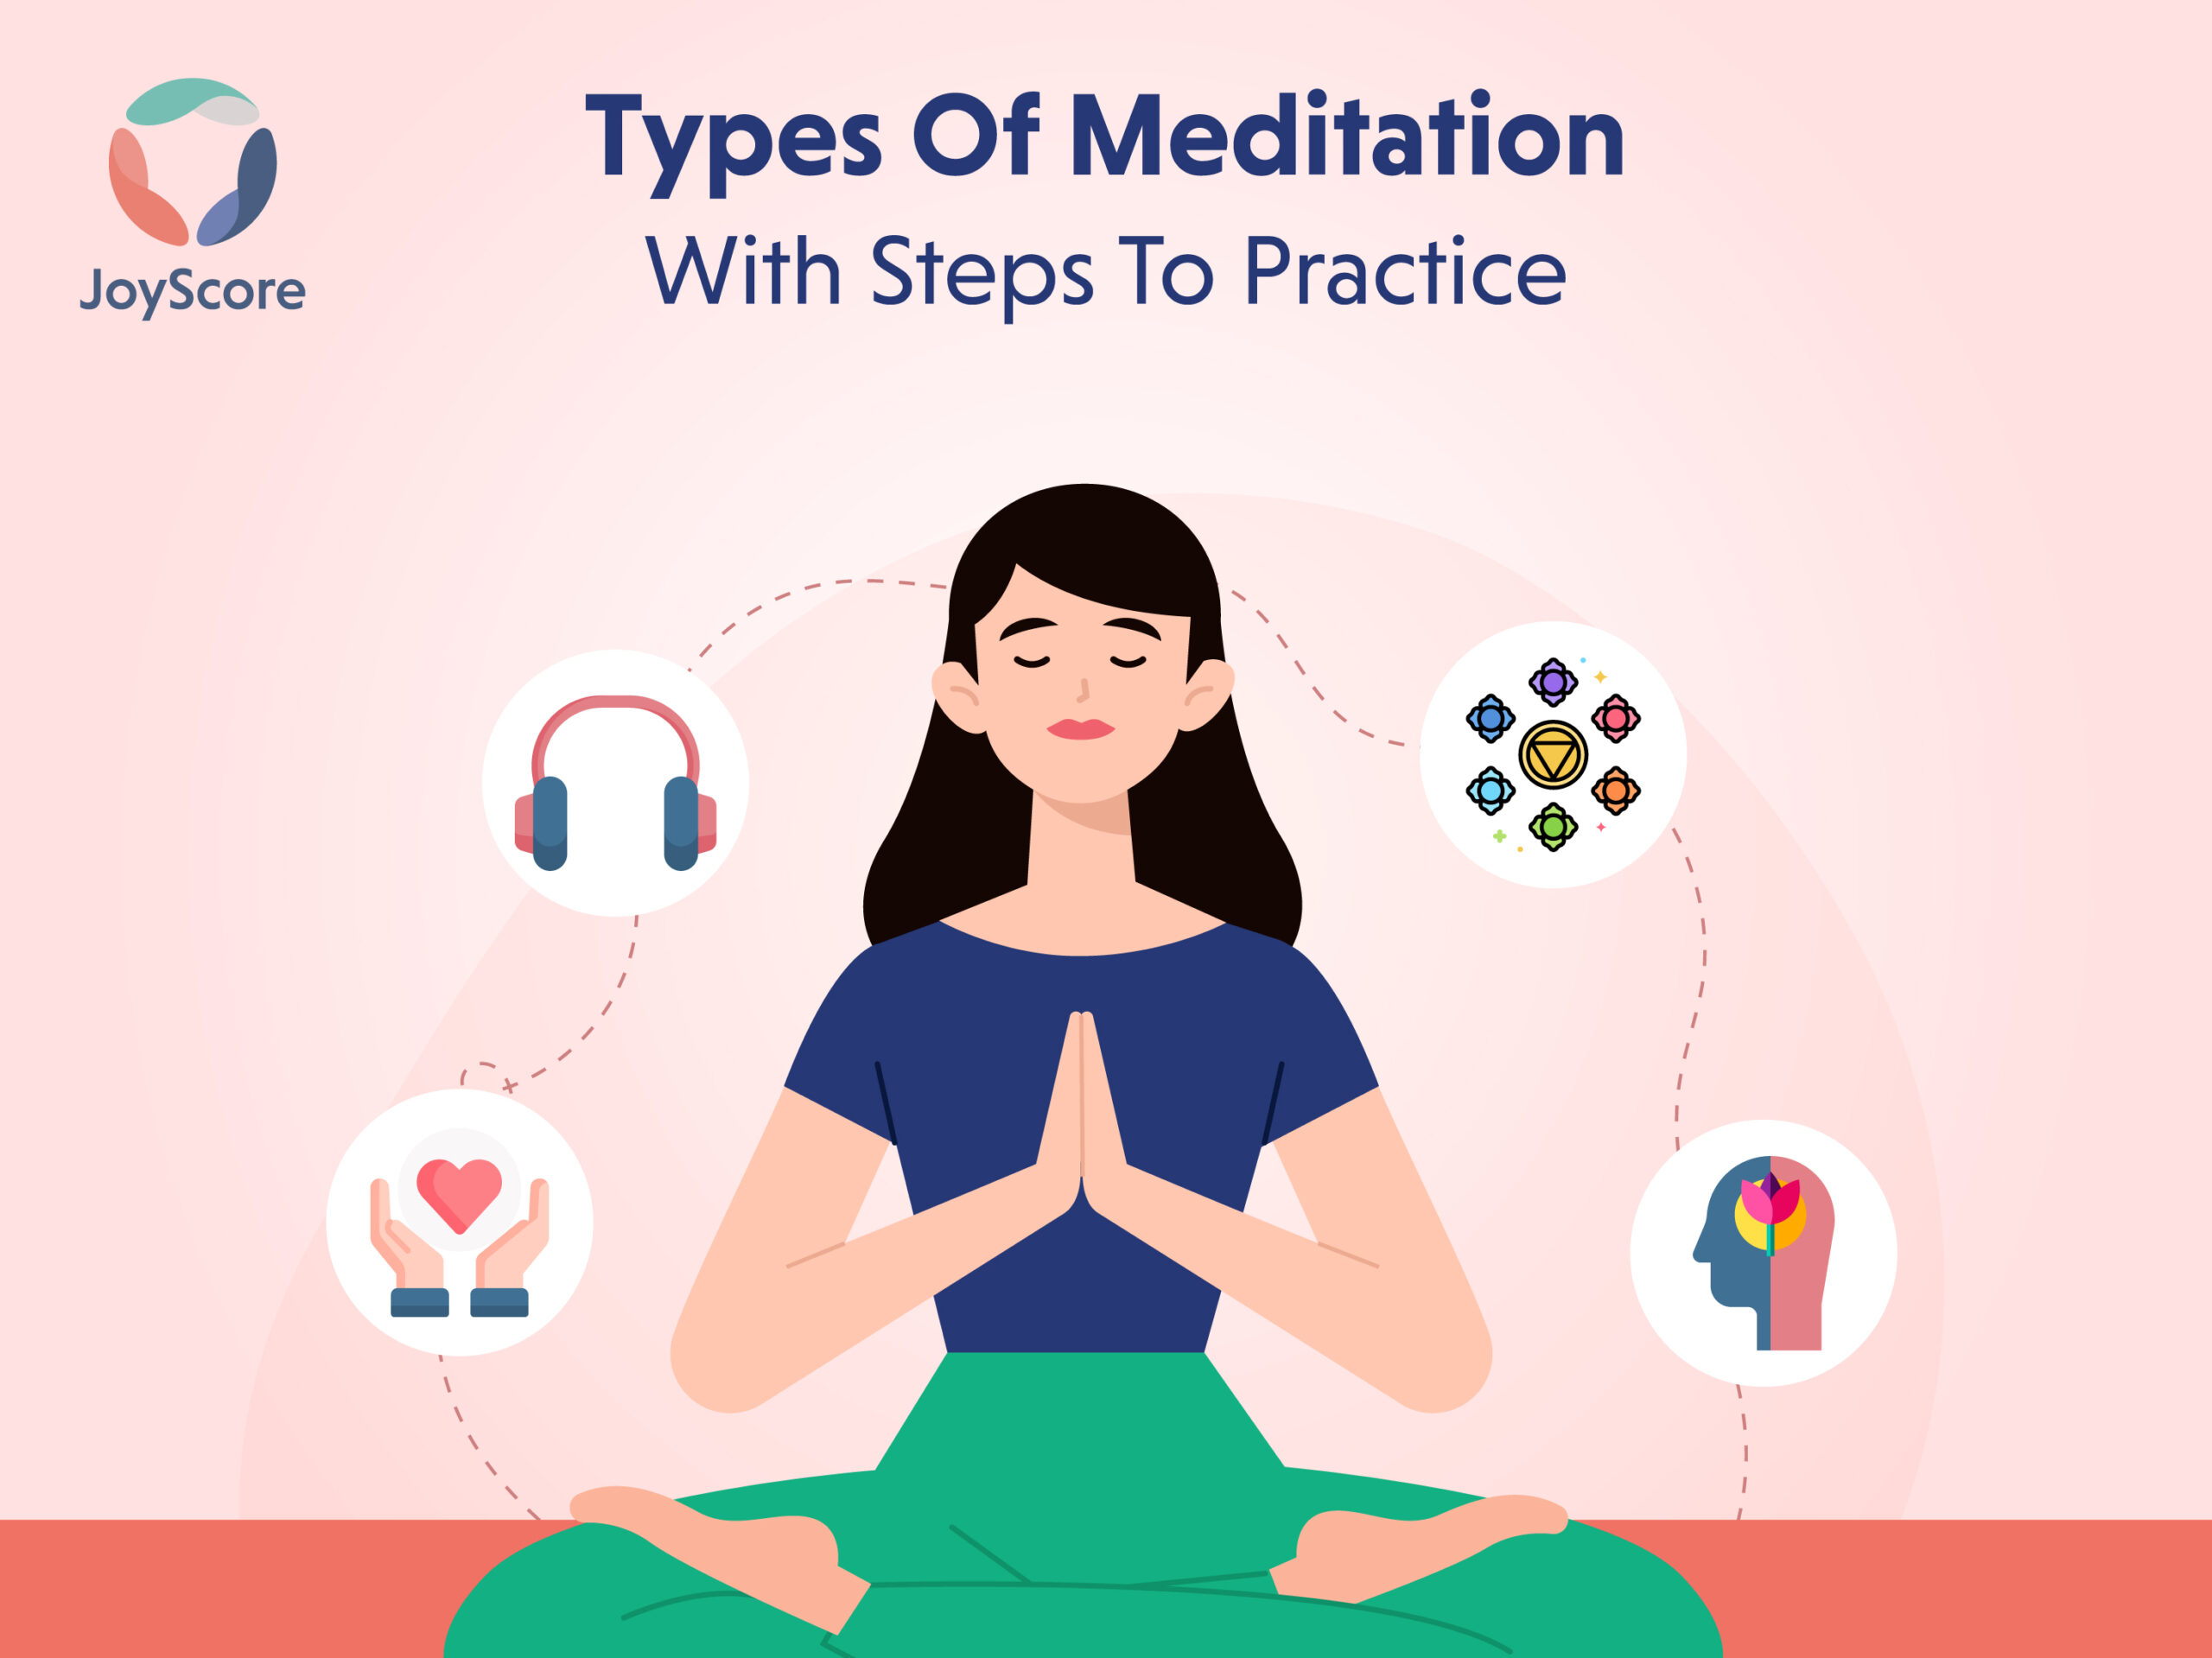 5 Types Of Meditations And Steps To Practice Them